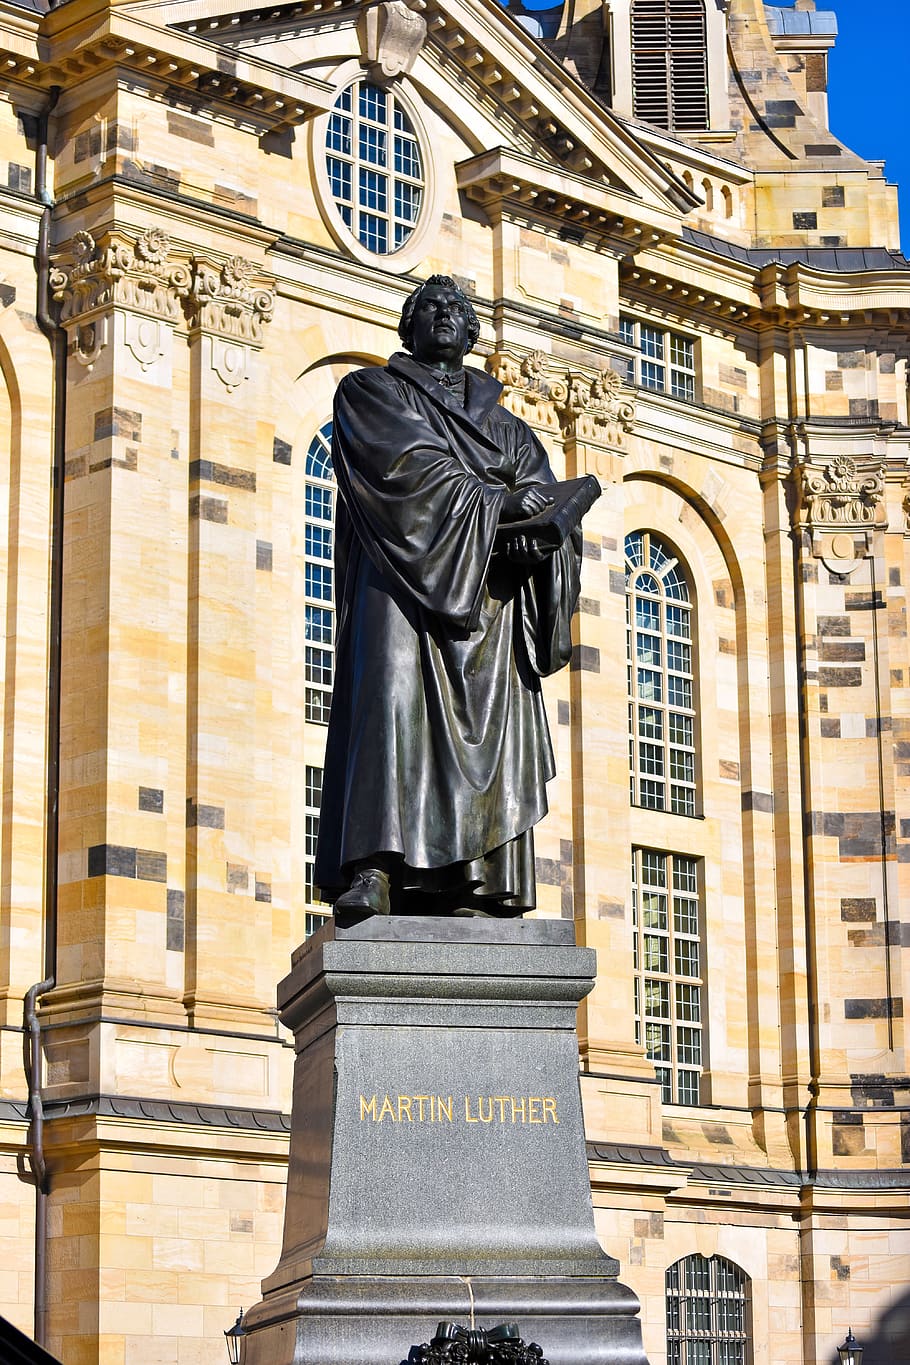 martin luther, influencer, social justice, reform, theologian, freile, church, europe, germany, sculpture